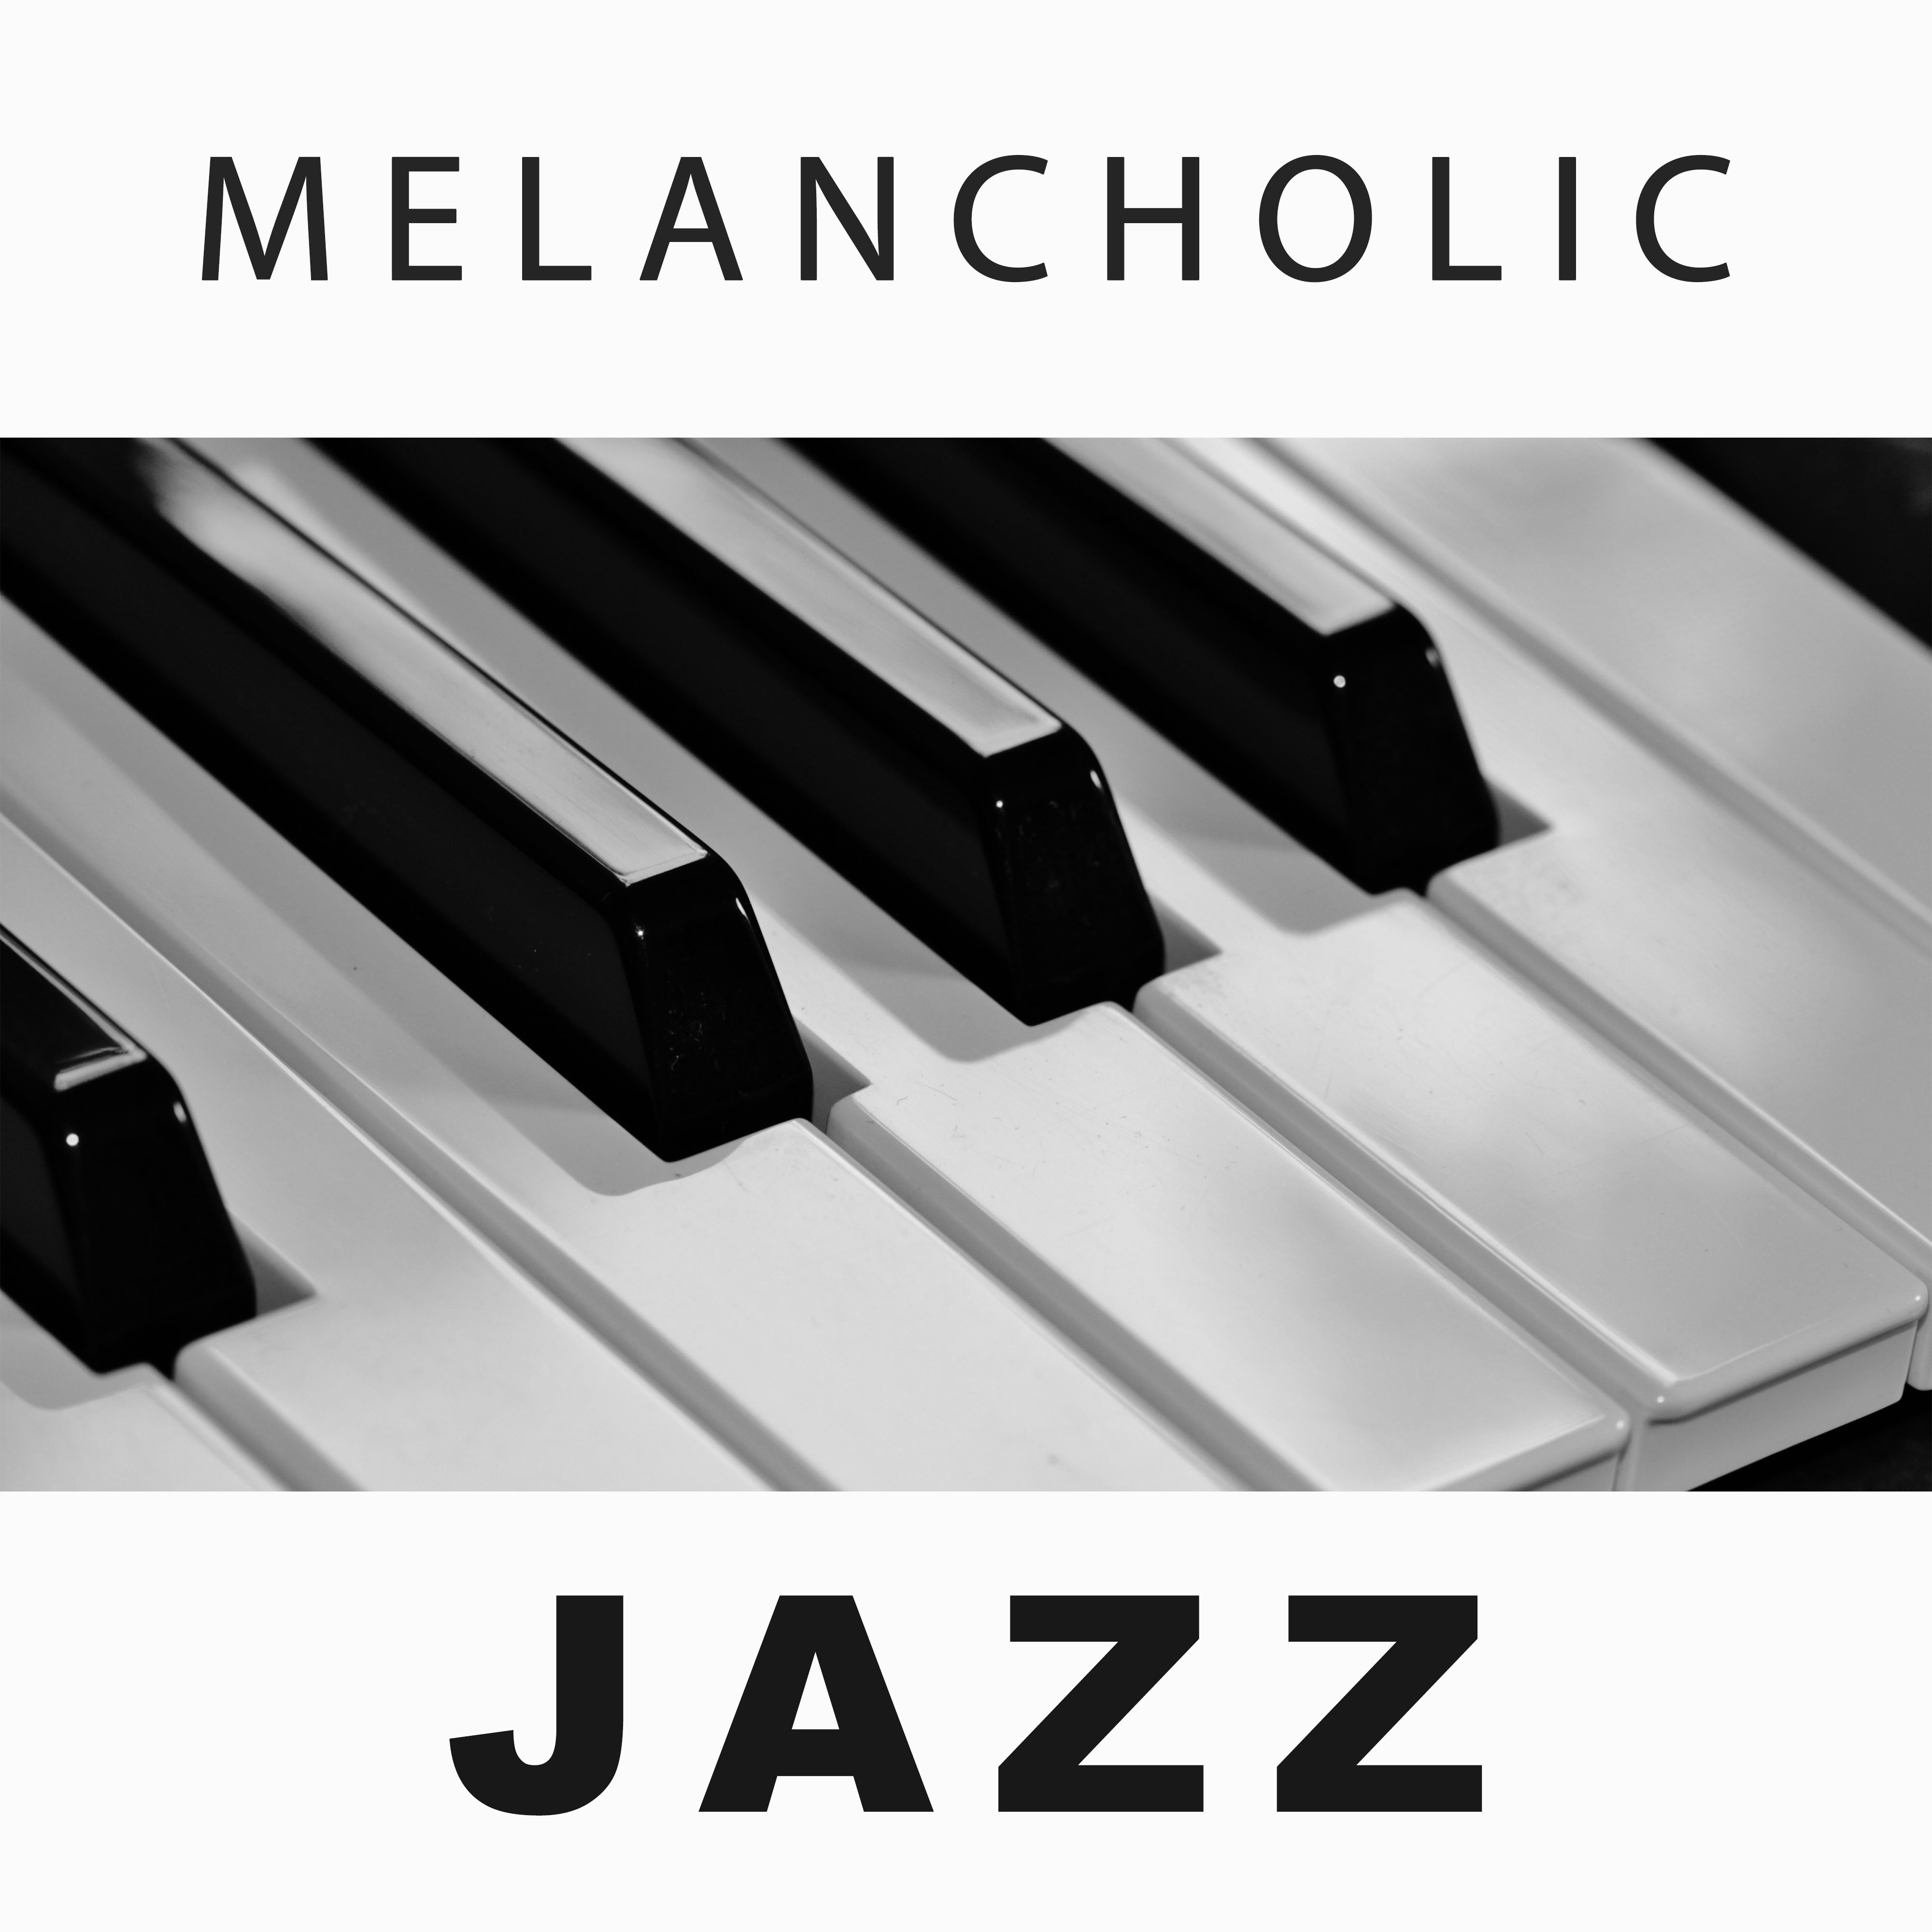 Melancholic Jazz  Ambient Piano Song, Jazz Romance, Soothing Music for Lovers